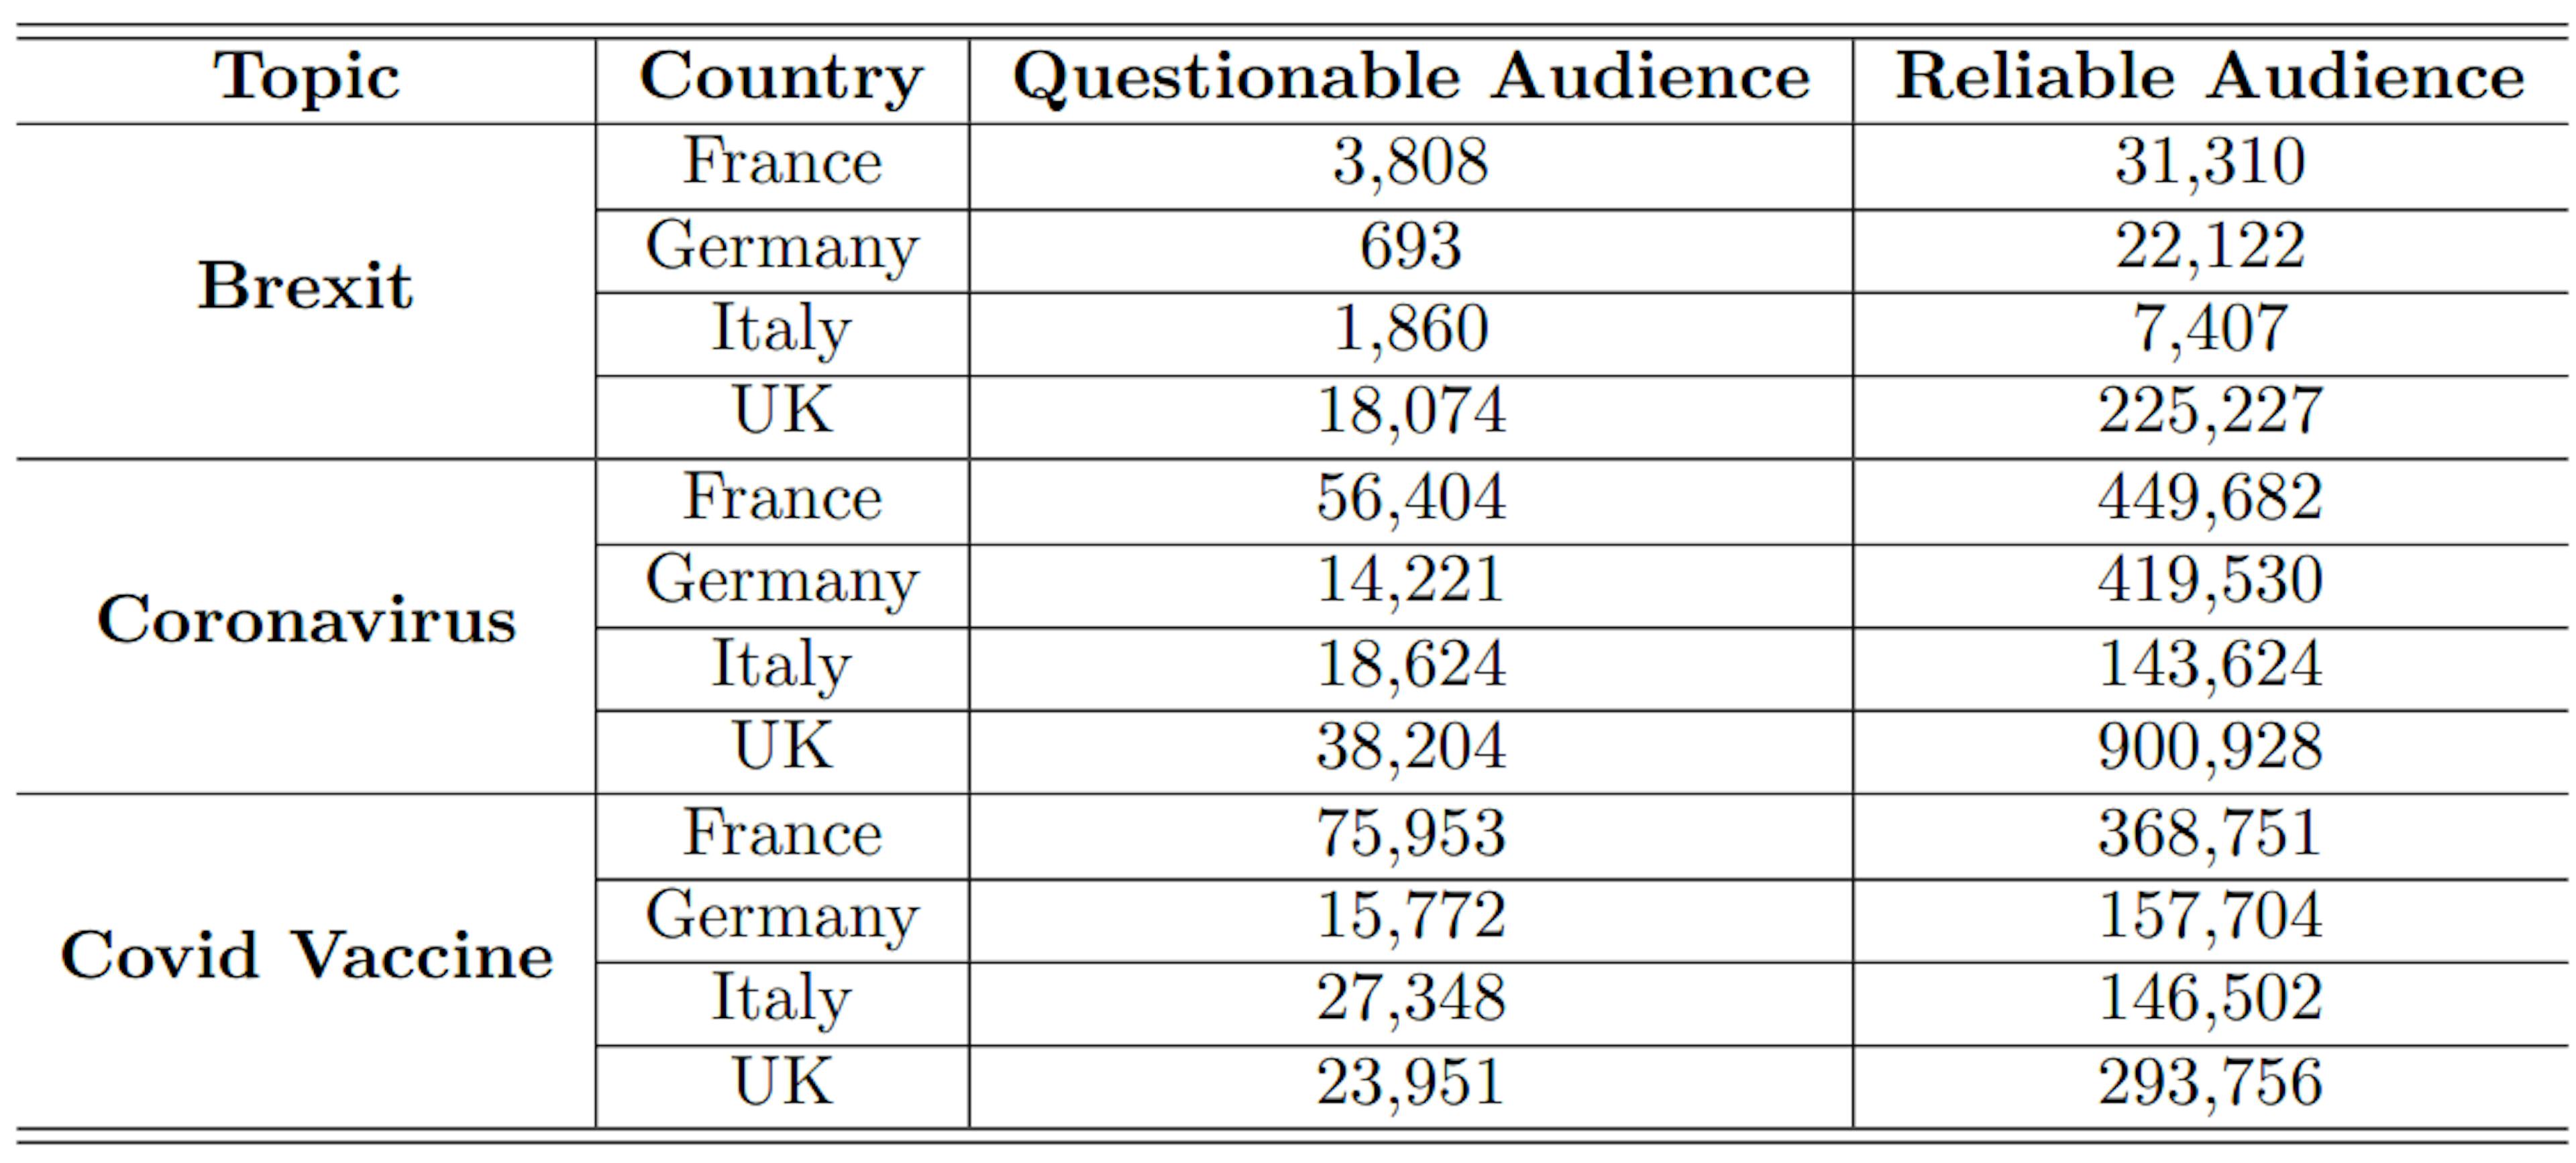 Table 4: Audience count for reliable and questionable news sources